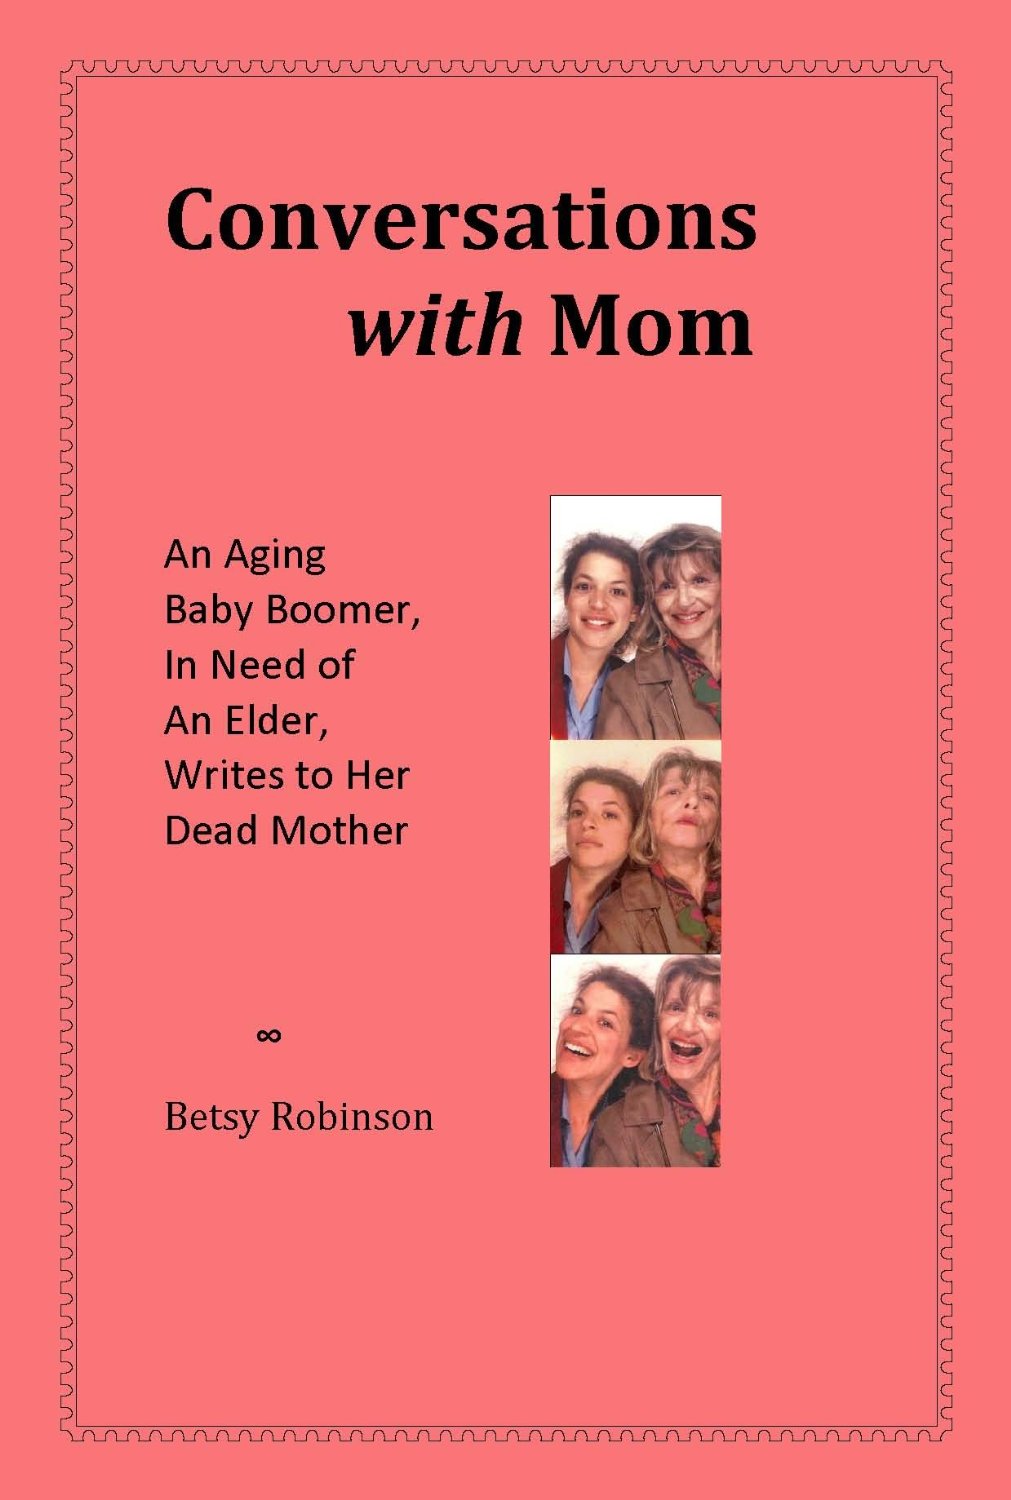 Book Reviews: Conversations with Mom